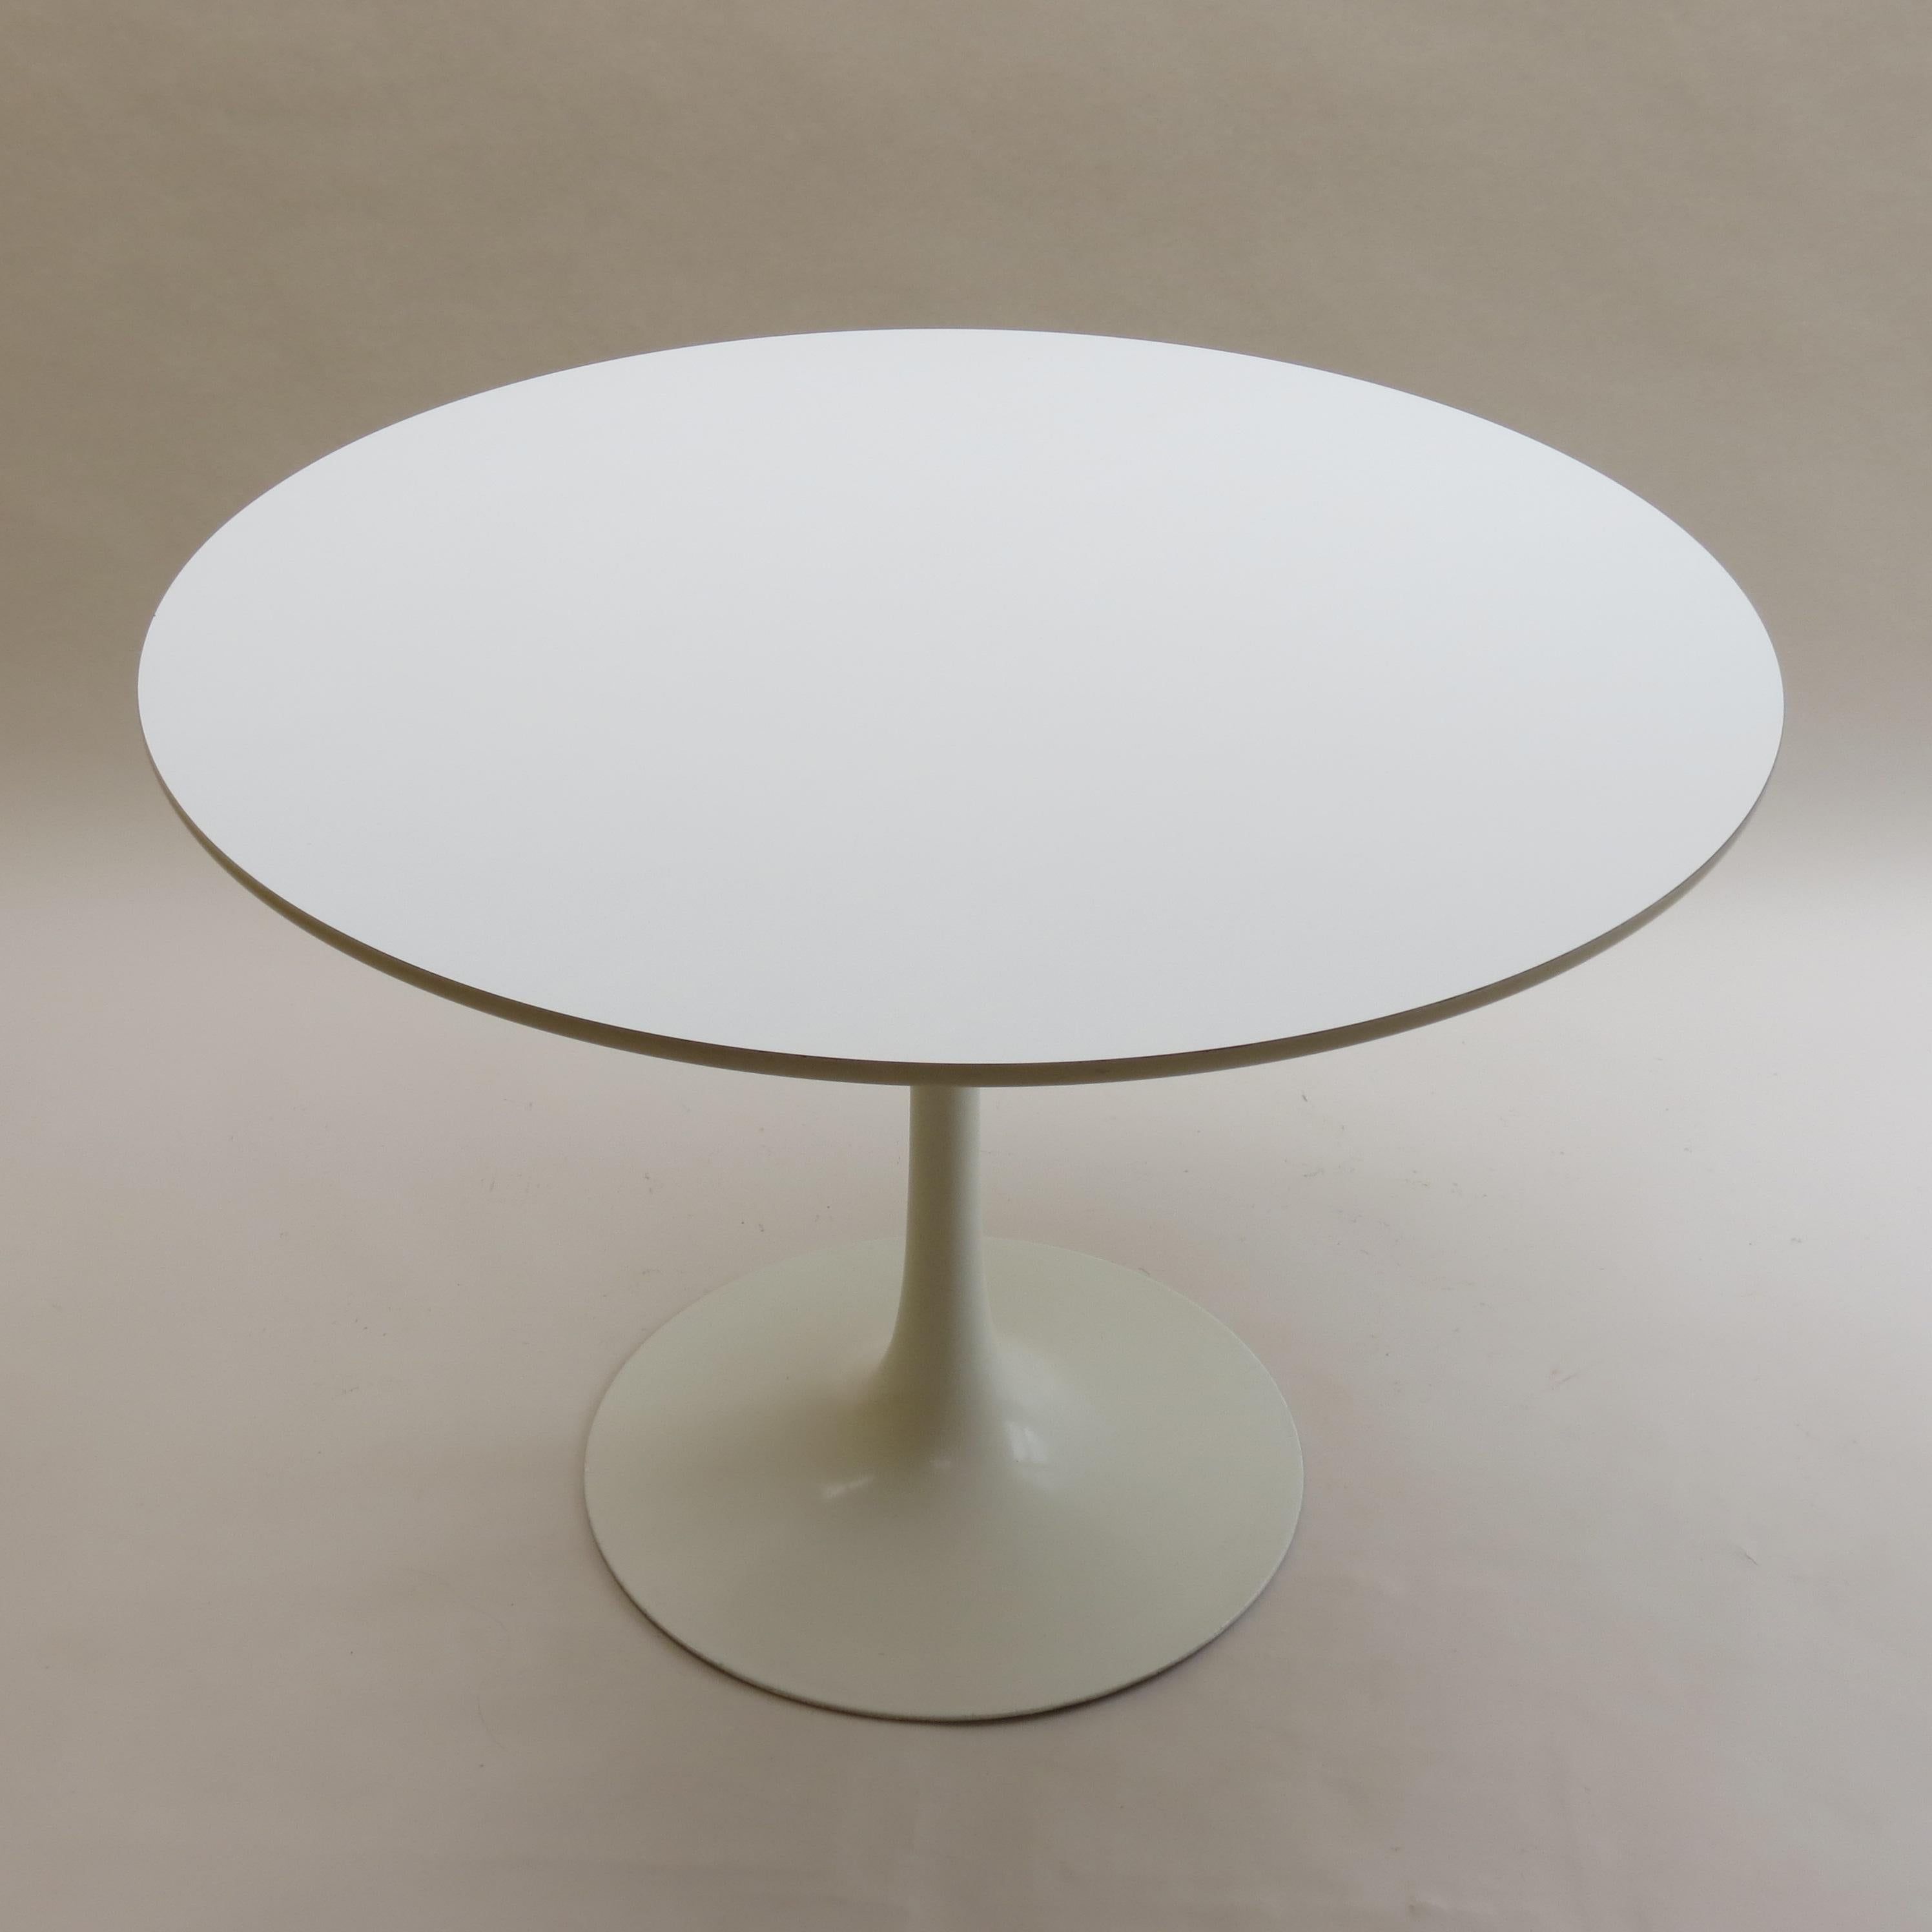 1960s white tulip dining table designed by Maurice Burke and manufactured by Arkana, UK. This is the middle sized dining table of the tables produced by Arkana, measuring: 105cm diameter.

White Formica top and painted cast aluminum base.

In